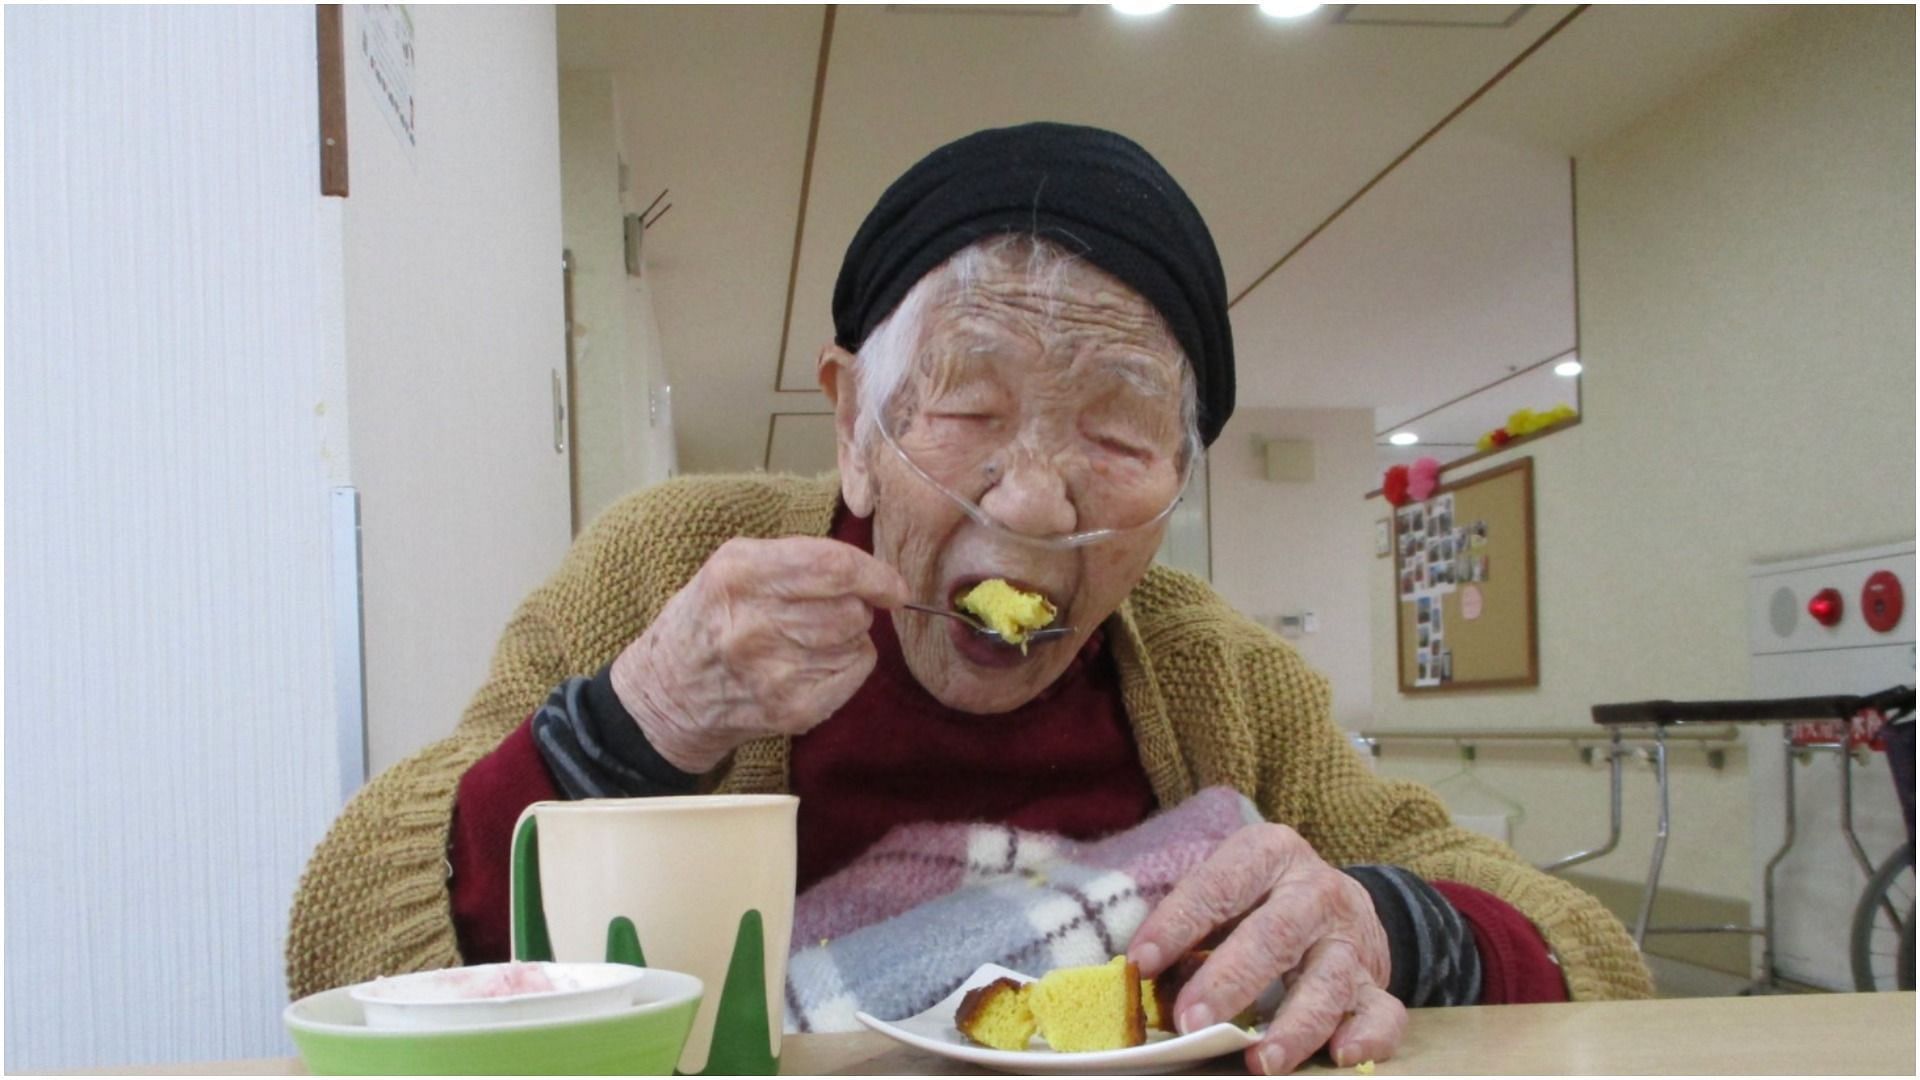 Kane Tanaka, the oldest person to be alive, dies at the age of 119. (Image via @tanakakane0102/ Twitter)